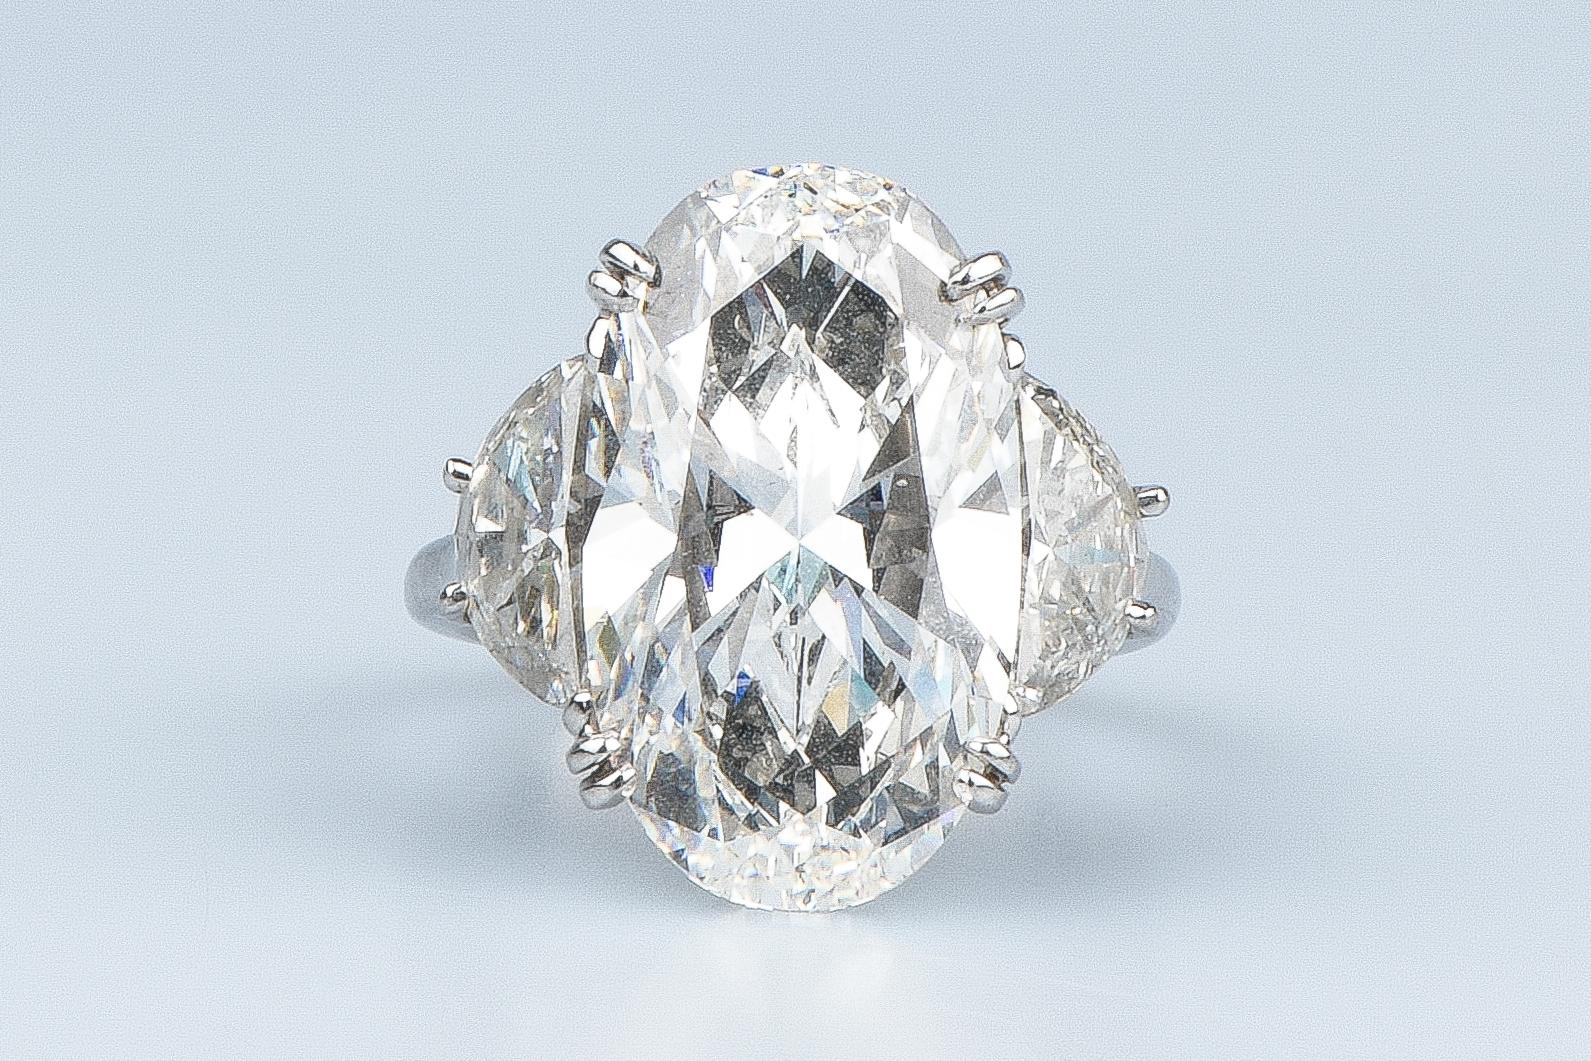 18 carat white gold elegant ring designed with 1 oval cut center natural diamond weighing 12.09 carat realised and created by William Goldberg, an American diamond dealer and the founder of the William Goldberg Diamond Corporation. 

Quality of the